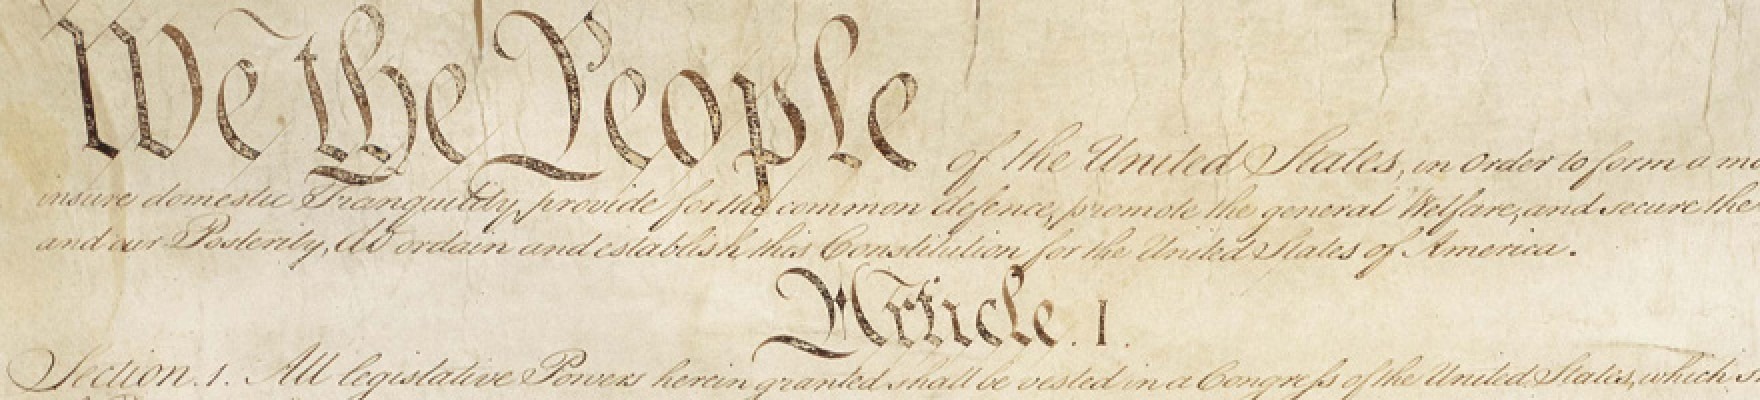 Close up of constitution showing "We the People".